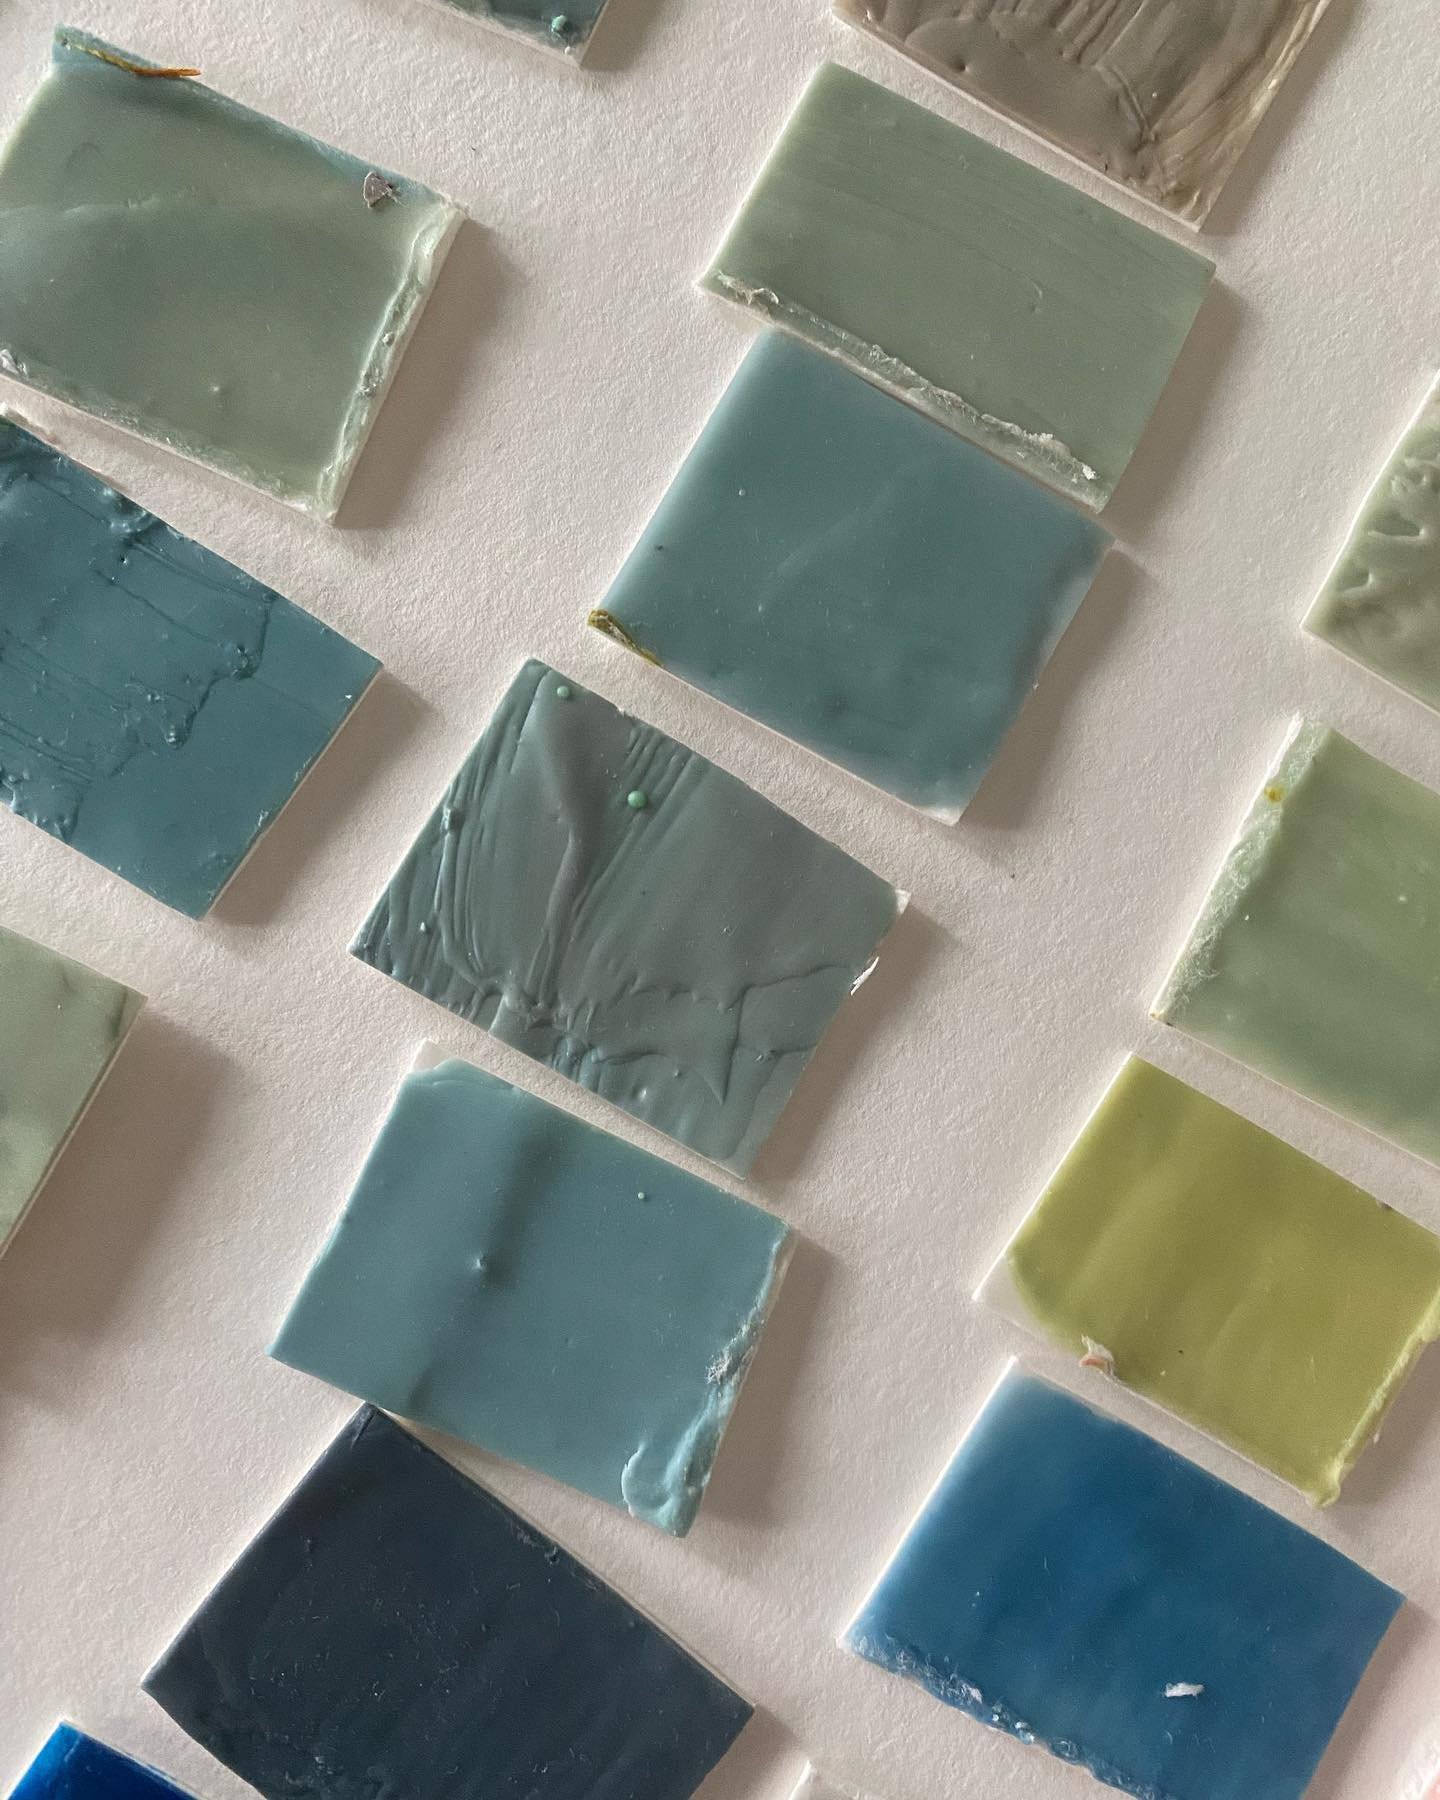 Making some paint swatches so my students can plan out their paintings during my workshop this Saturday. I still have some spots left in the 3-6 class. Link in bio to register!

#encaustic
#encausticpaint
#encausticworkshop
#madisonwi
#madisonwicreat